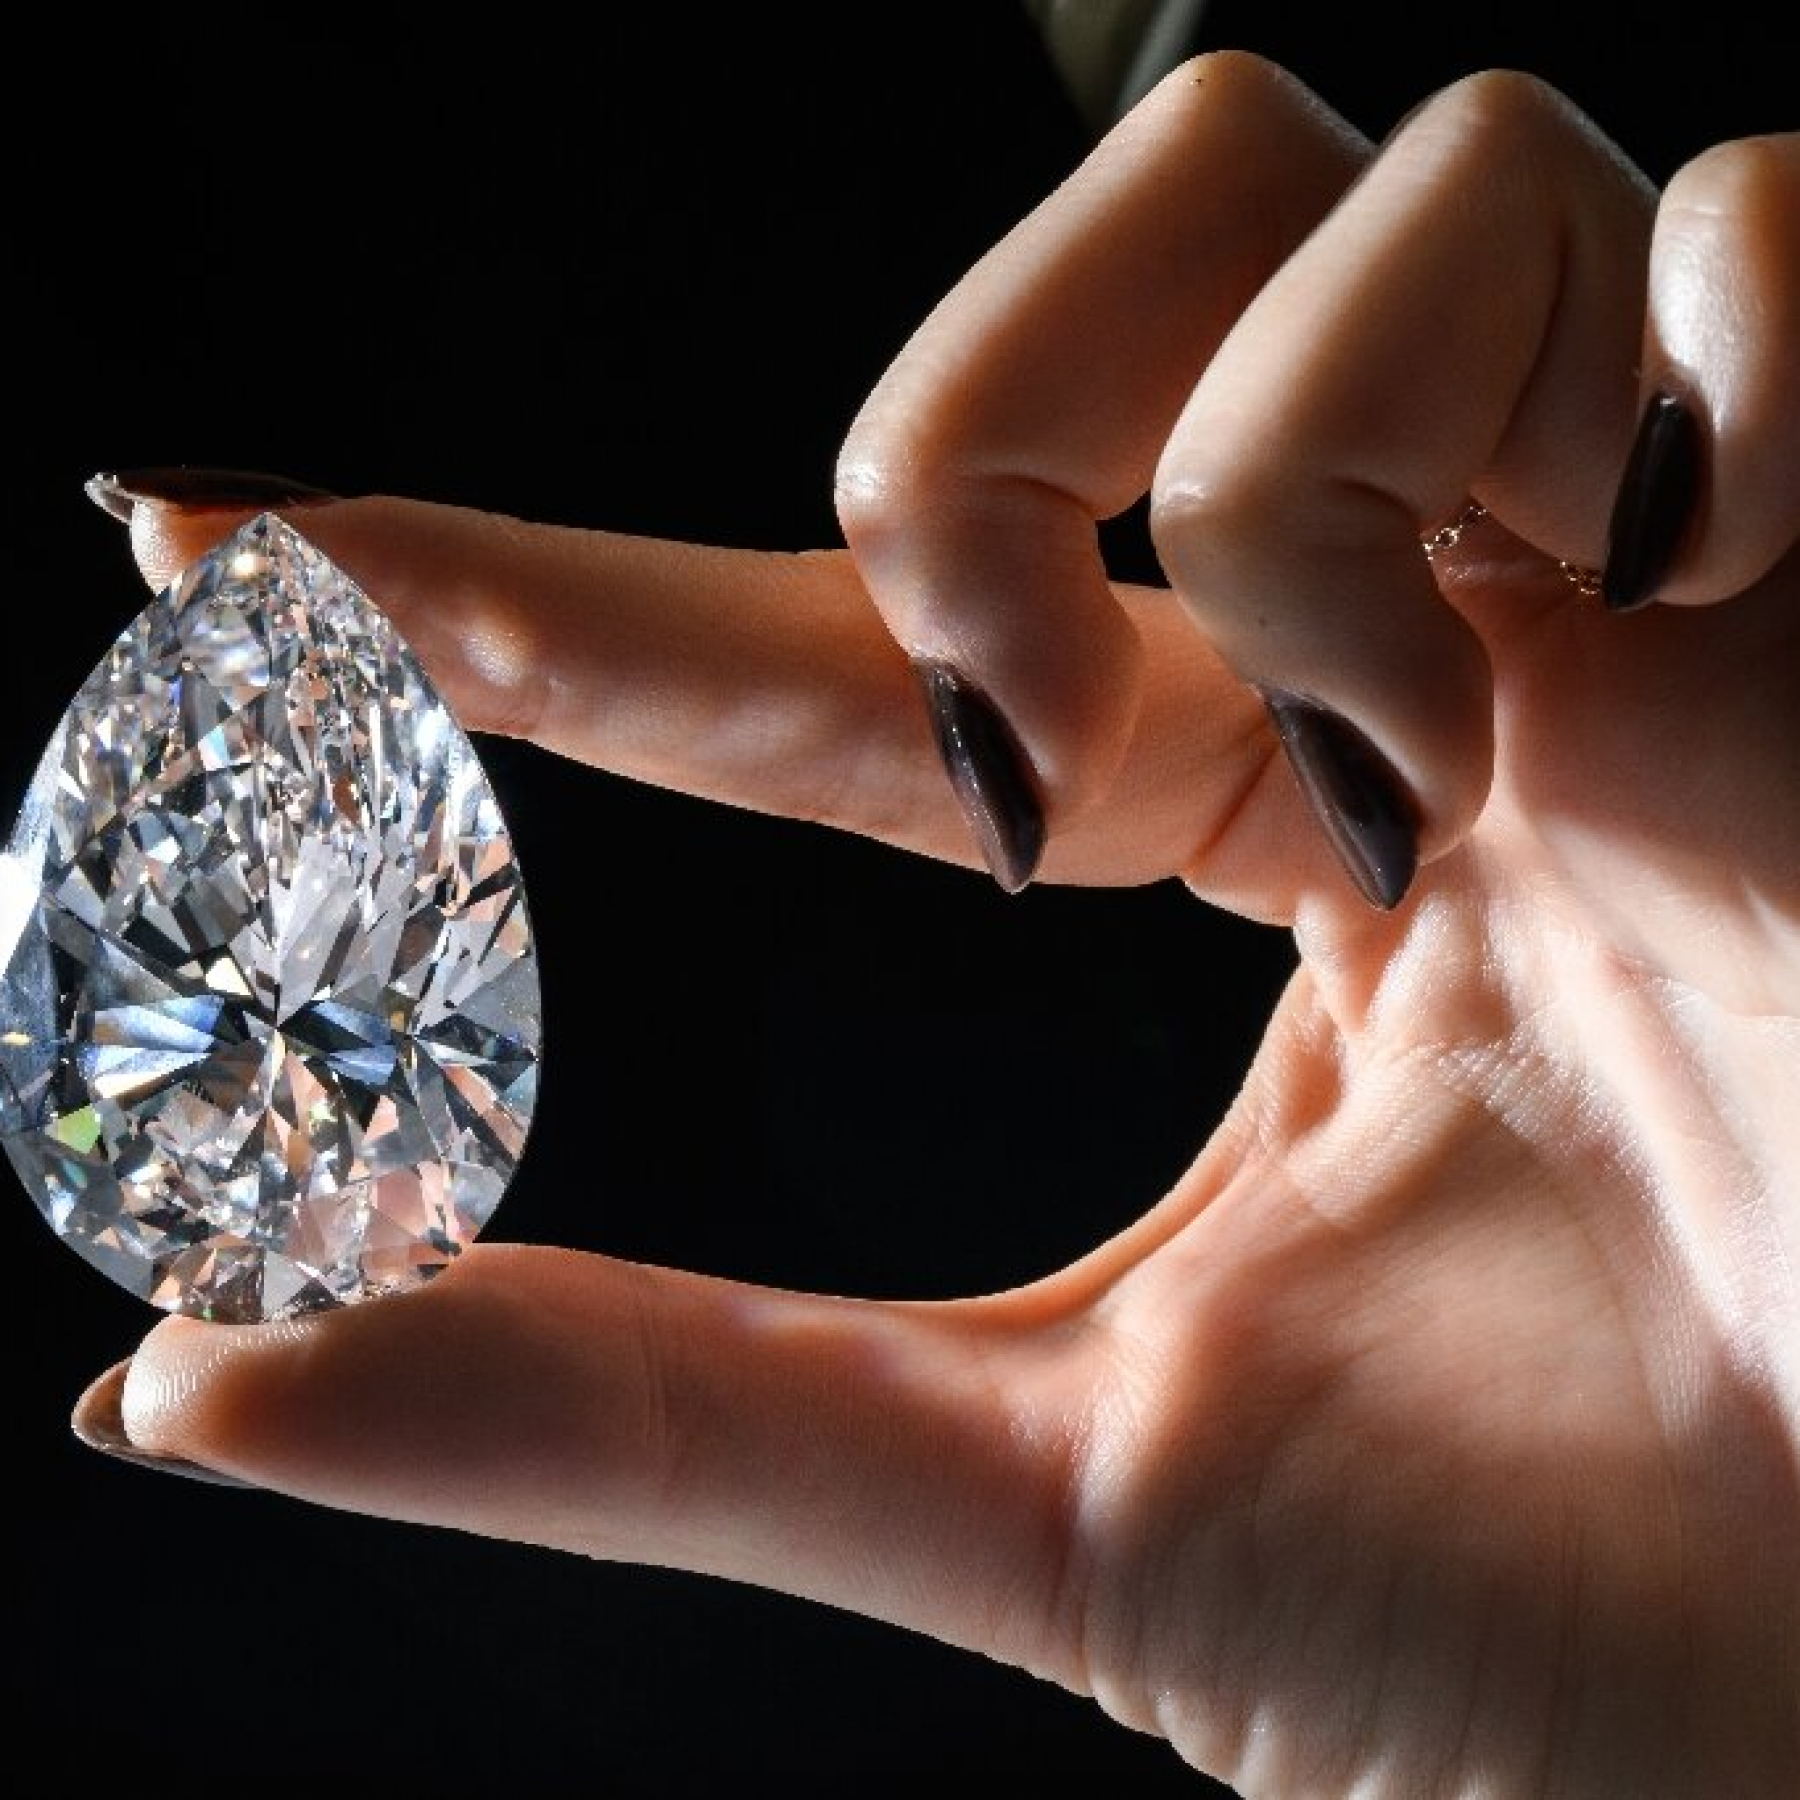 Biggest white diamond to be auctioned egg-shaped The Rock fetches over $21 million in auction